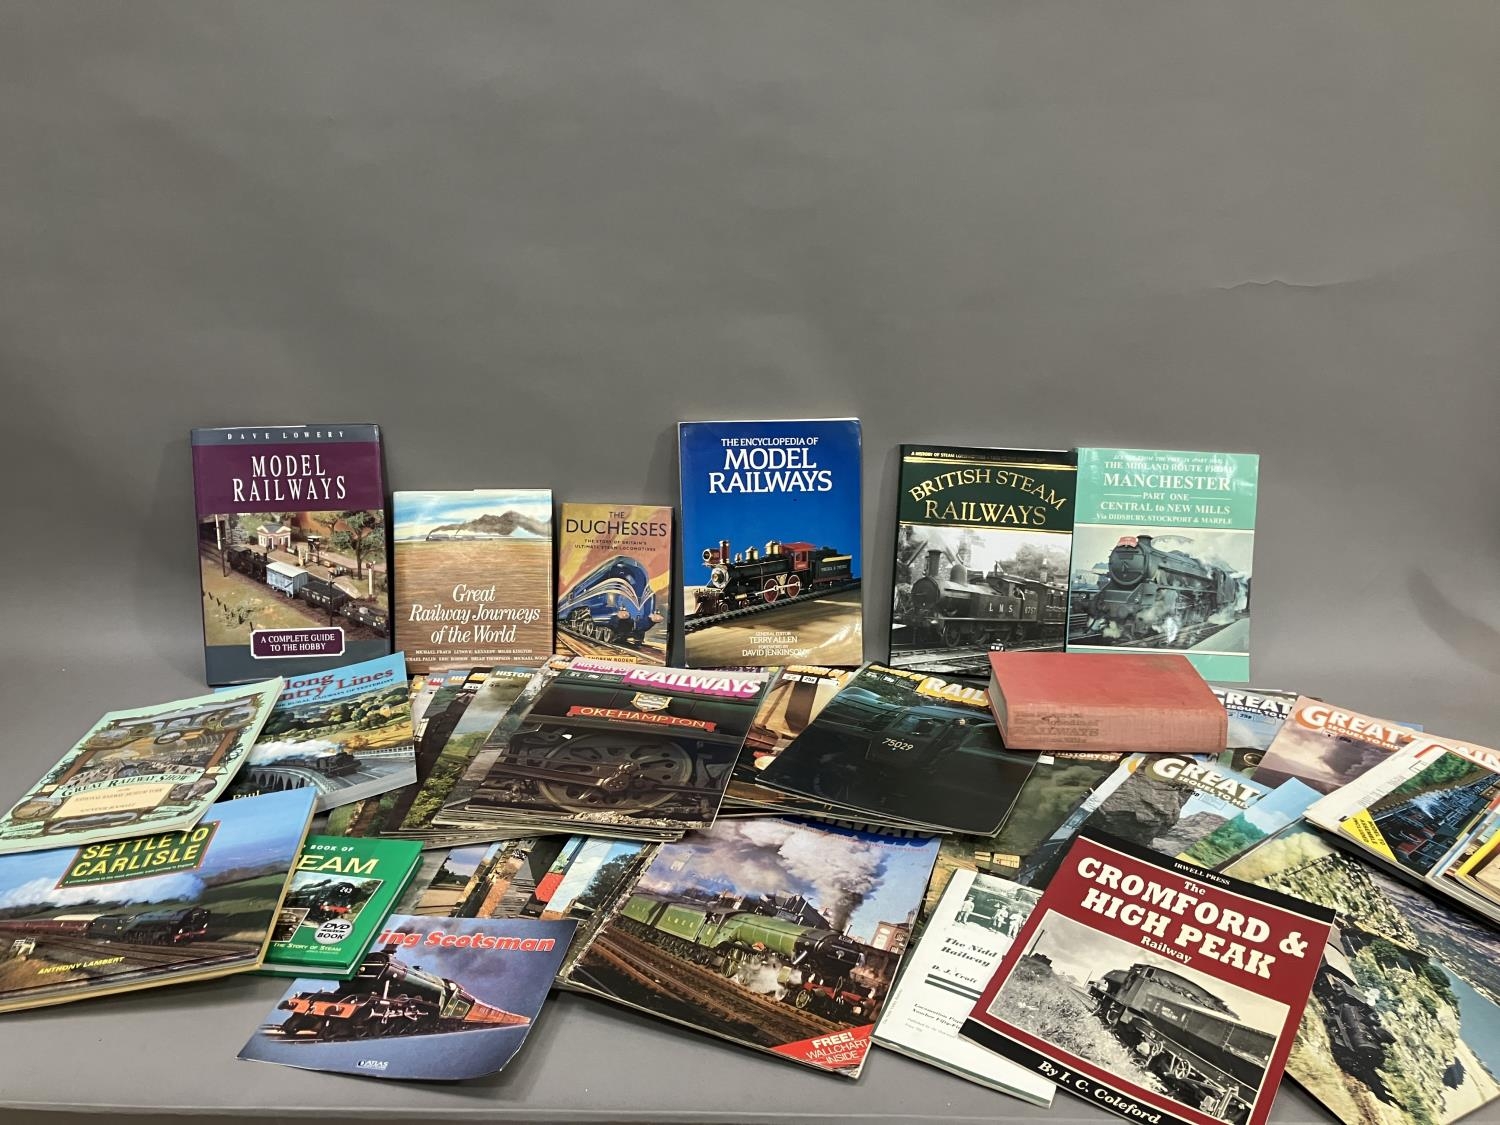 A collection of railway reference books, guides and pamphlets, along with a consecutive collection